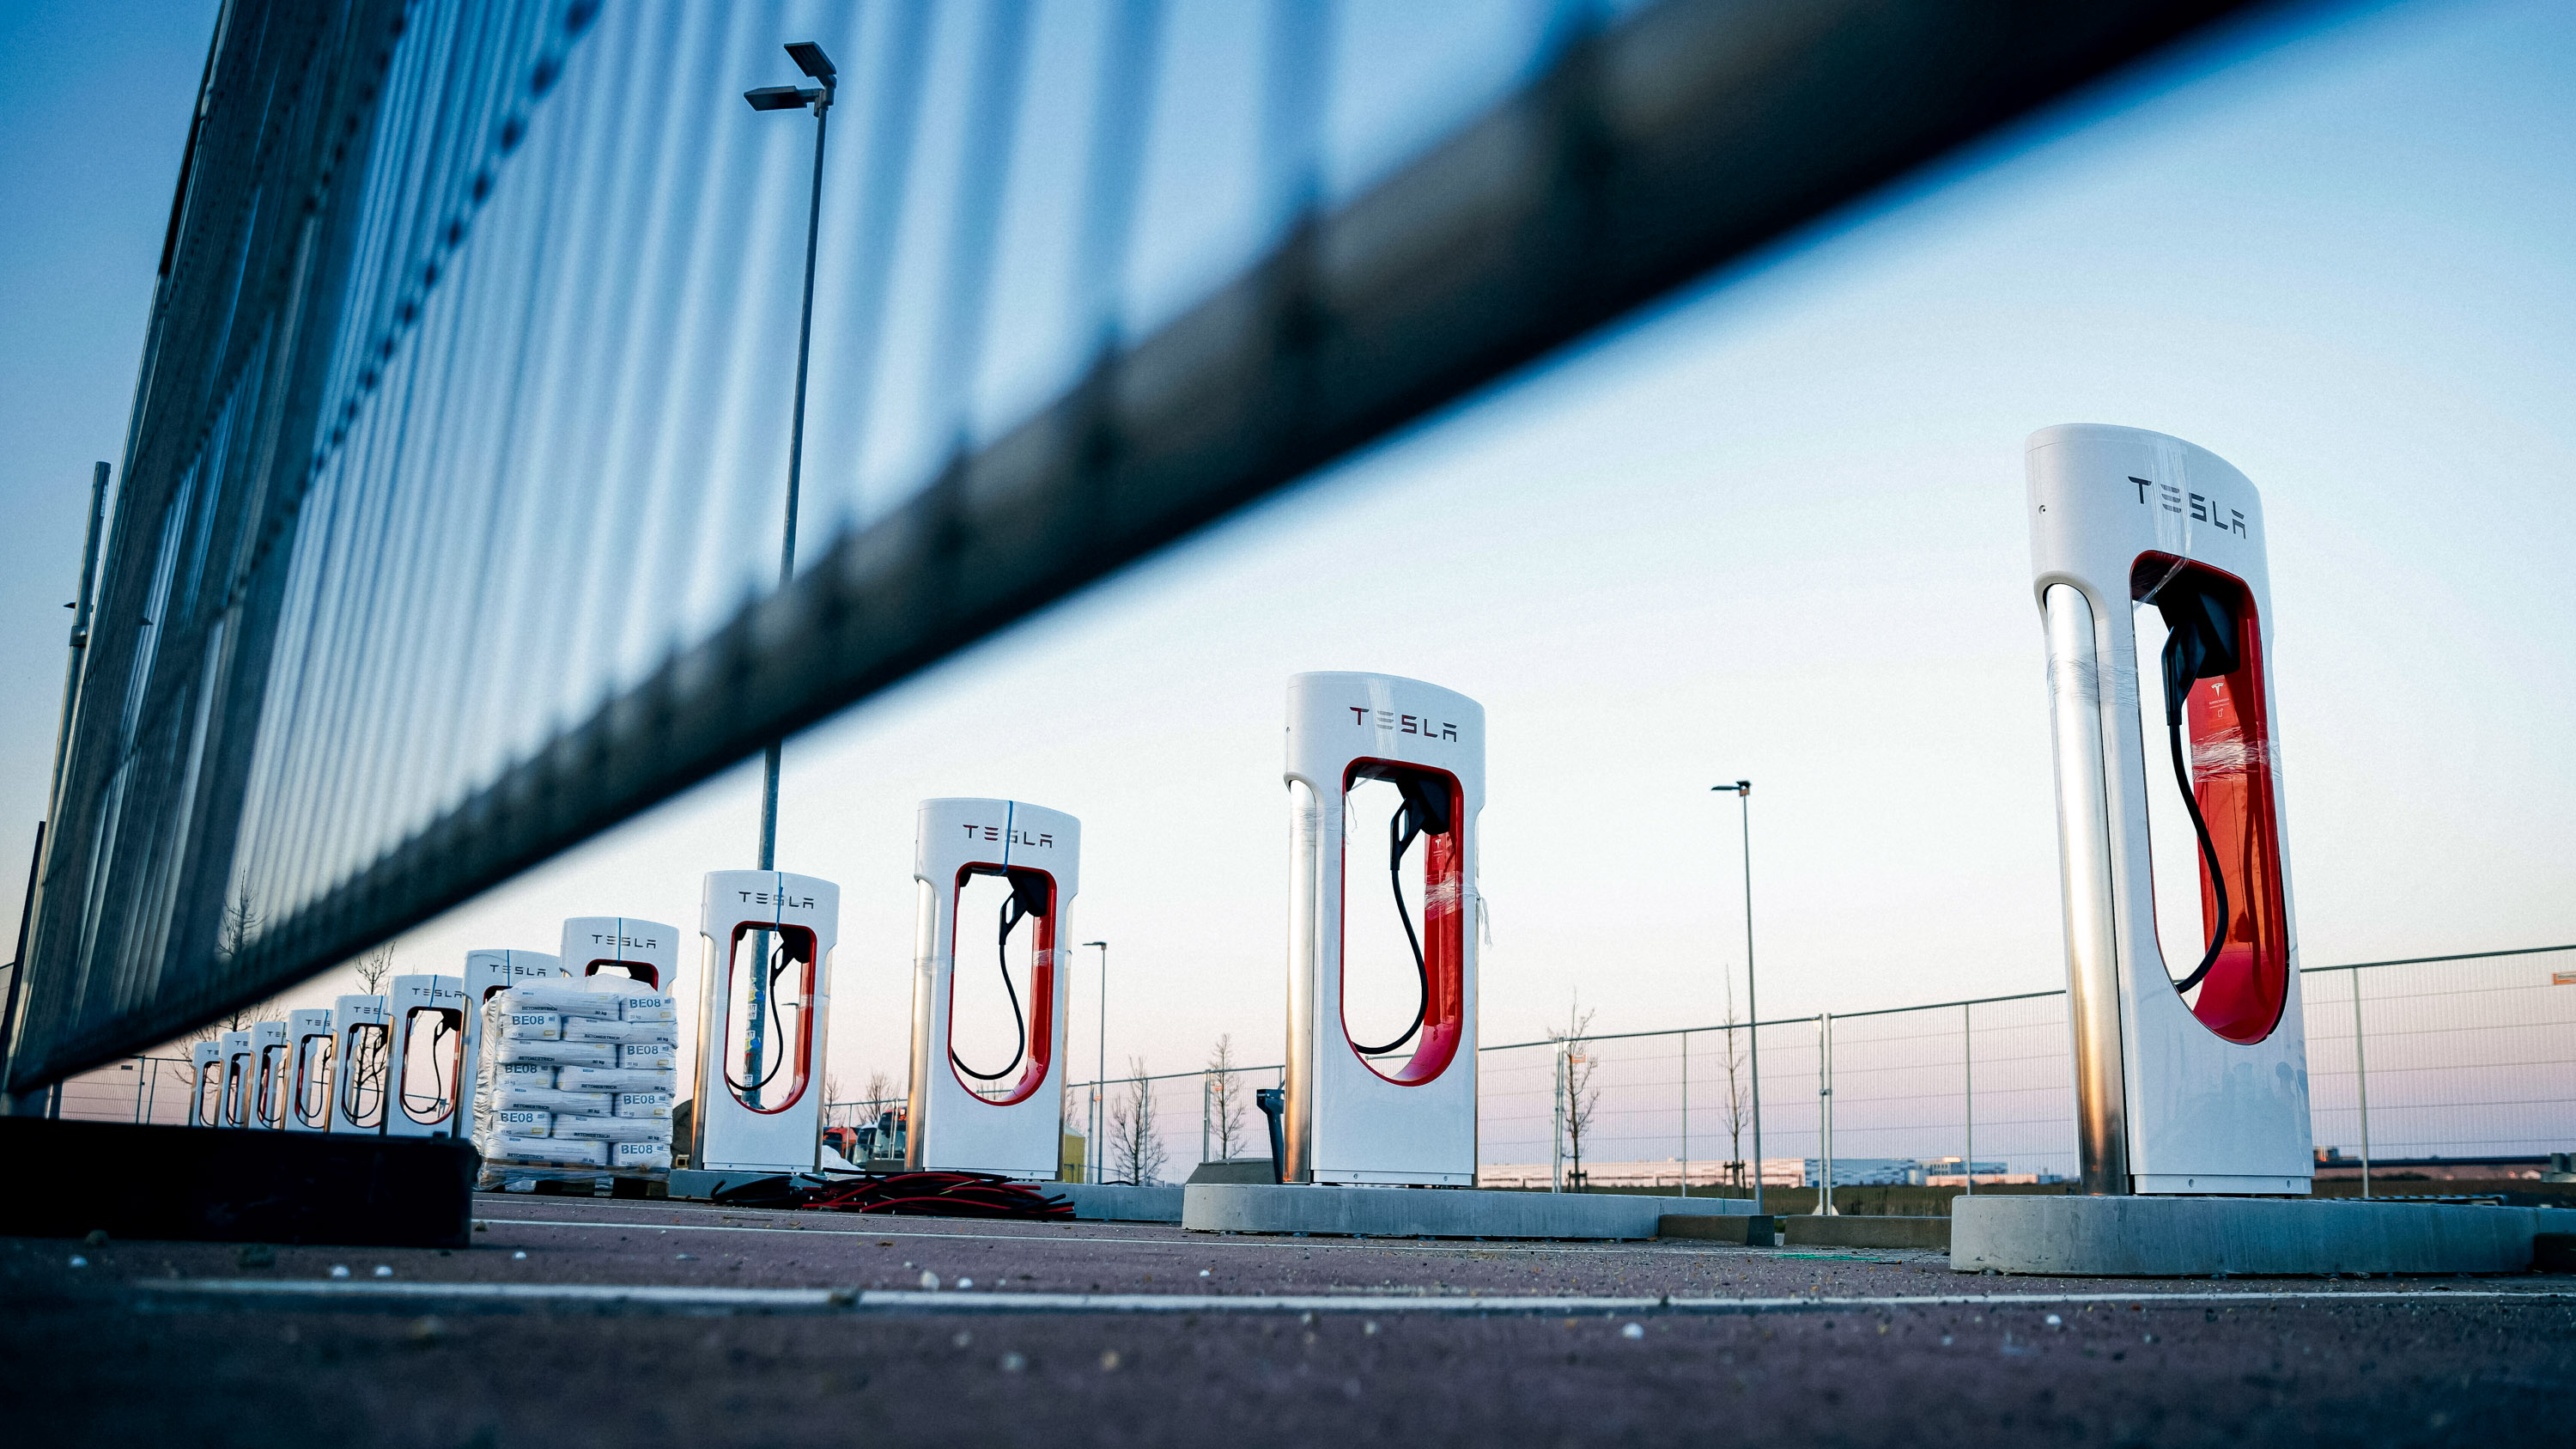 Row of Tesla superchargers seen from a low angle under a barriewr in early morning light